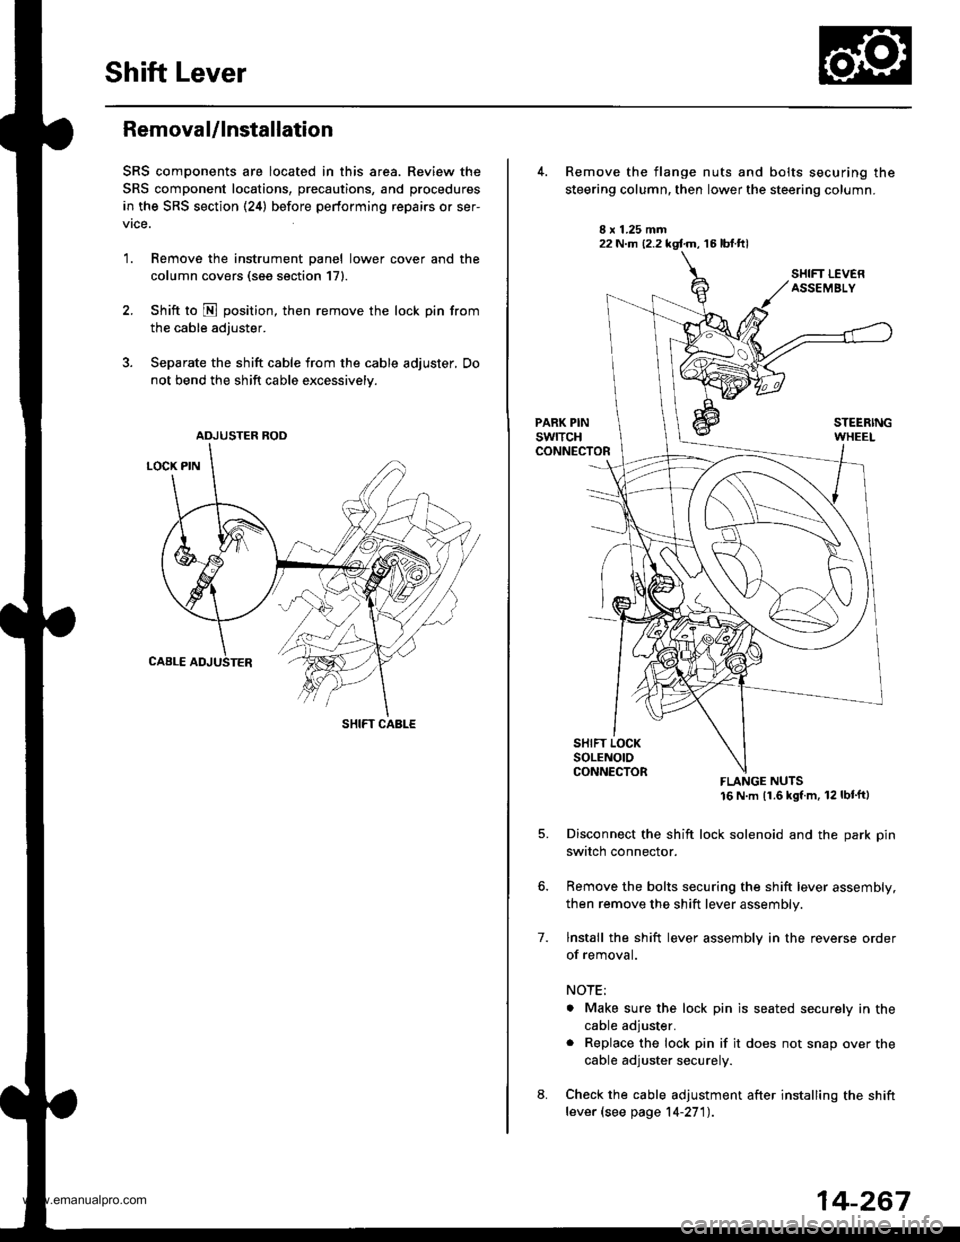 HONDA CR-V 1997 RD1-RD3 / 1.G Workshop Manual 
Shift Lever
Removal/lnstallation
SRS components are located in this area. Review the
SRS component locations, precautions, and procedures
in the SRS section (24) before performing repairs or ser-
vrc